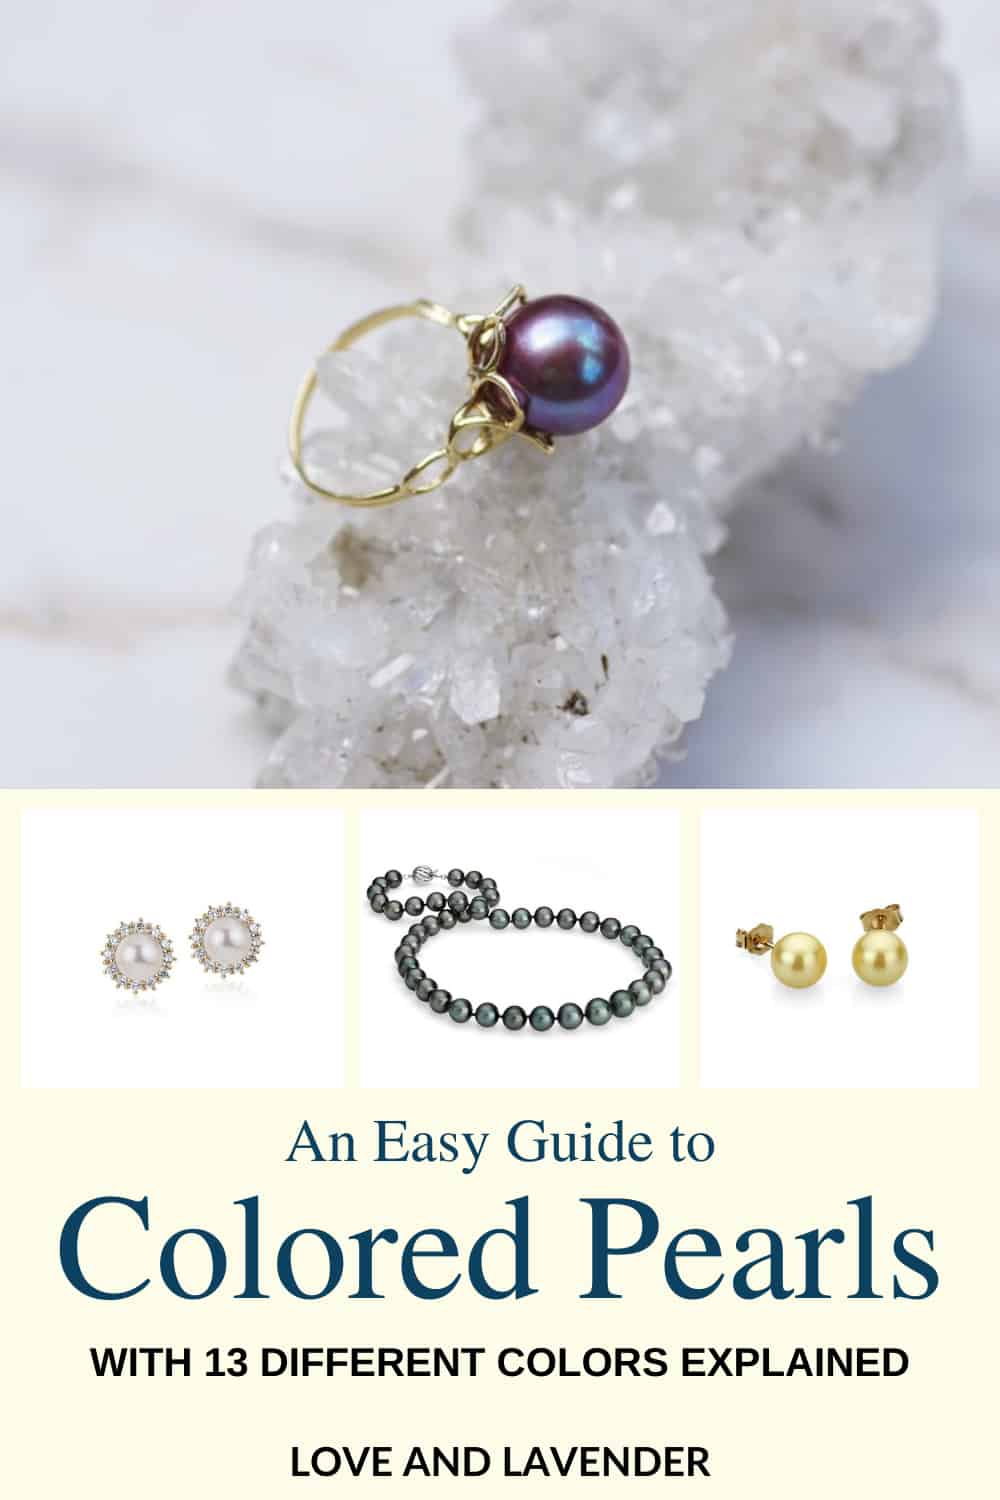 Pinterest pin - An Easy Guide to Colored Pearls